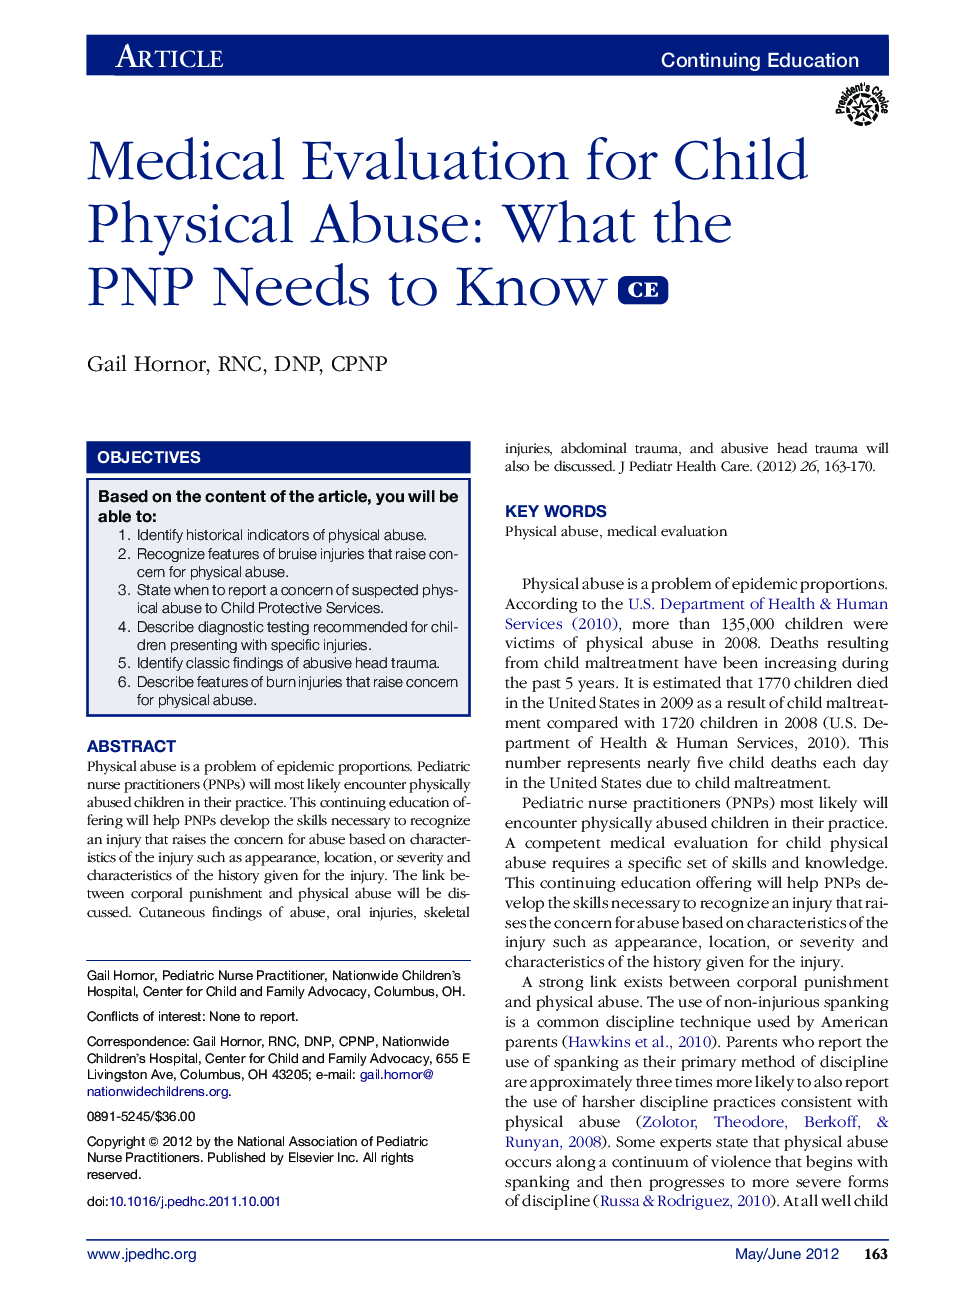 Medical Evaluation for Child Physical Abuse: What the PNP Needs to Know 